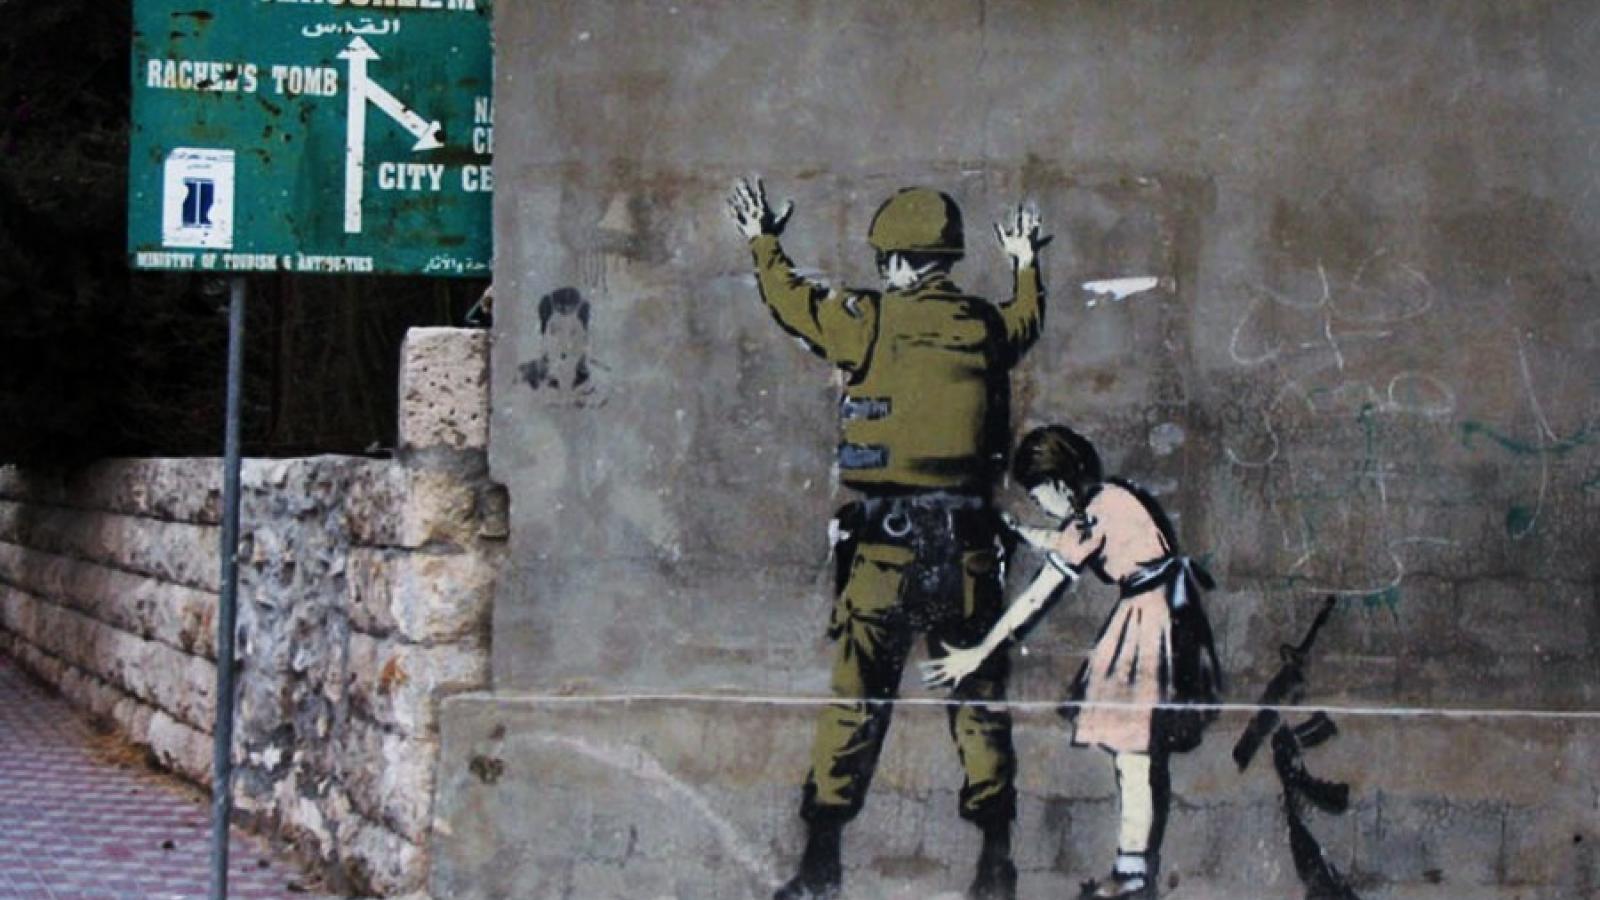 Banksy street art wallpaper - (#173860) - High Quality and ...